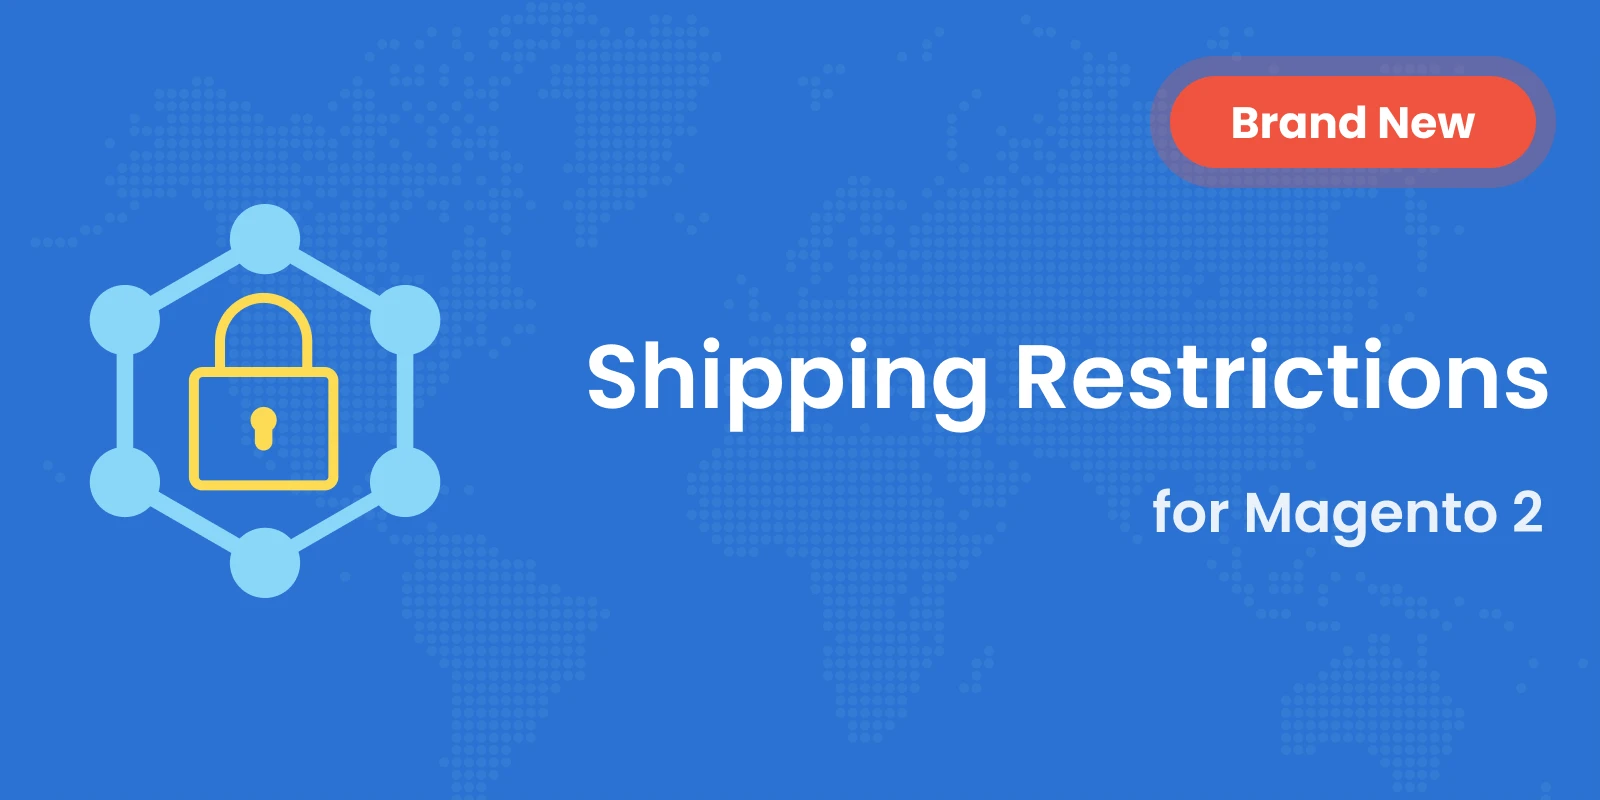 New Module: Magento 2 Shipping Restrictions